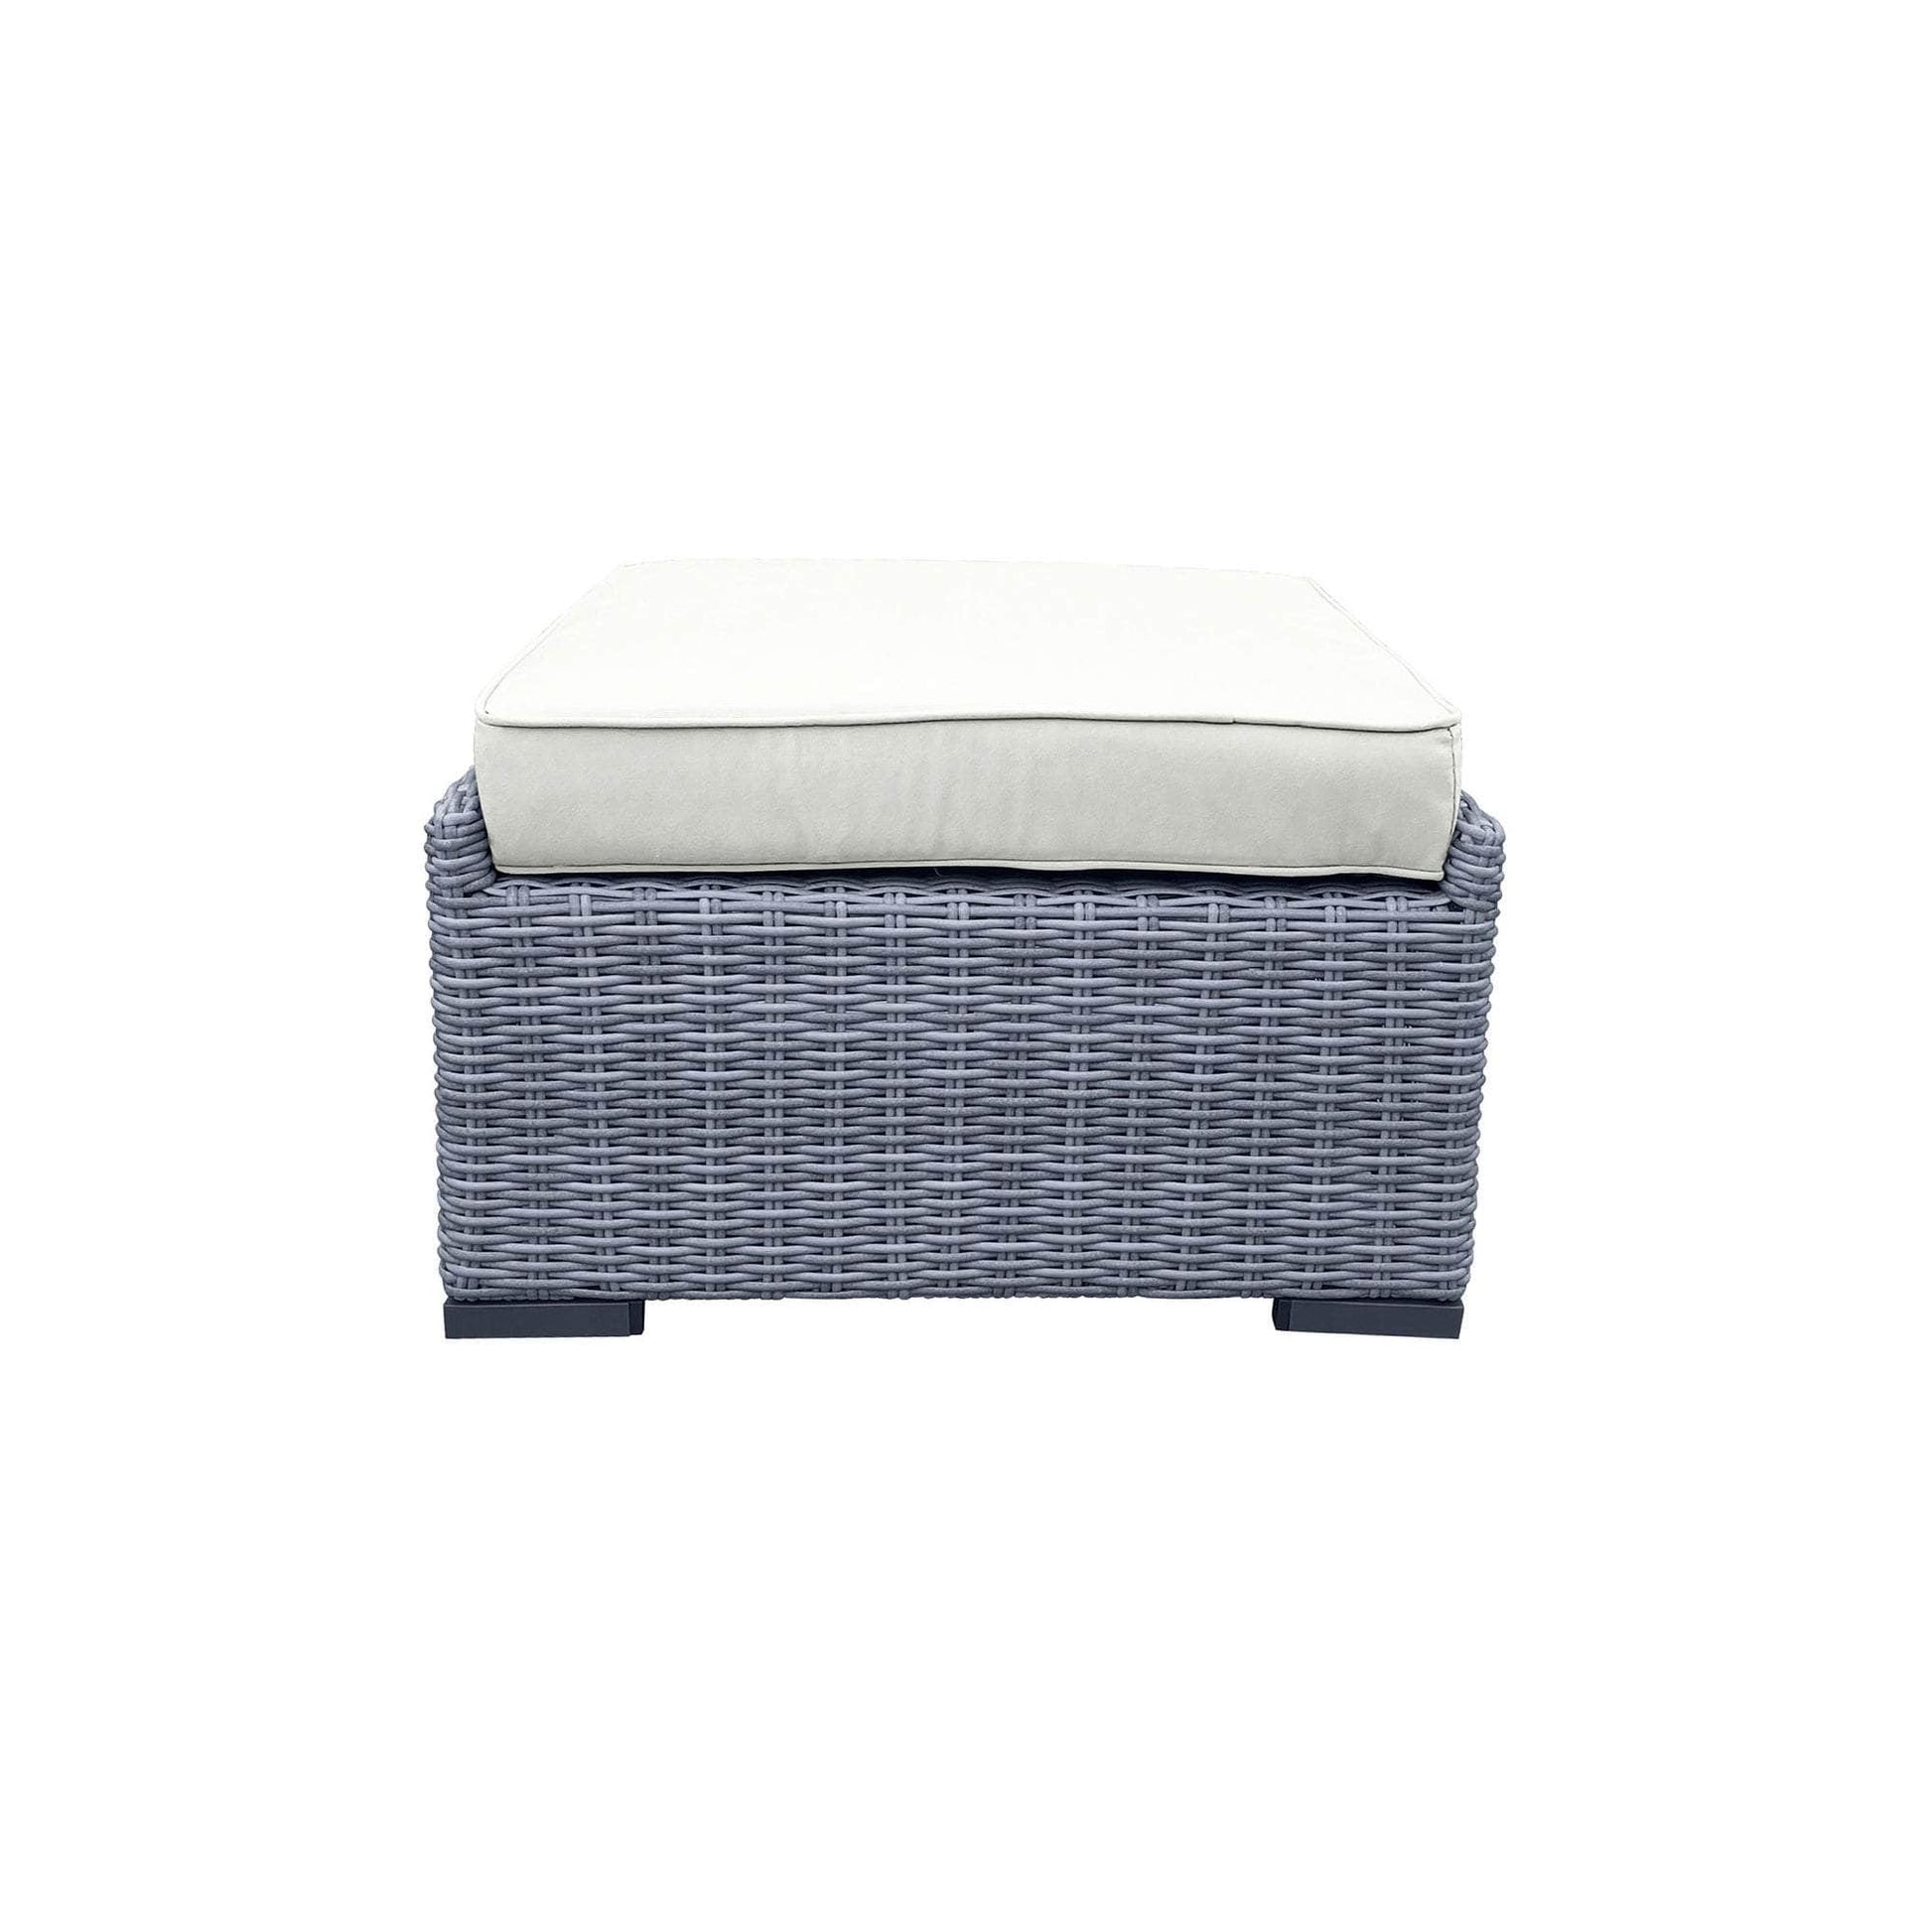 CIEUX Ottoman Canvas Natural Cannes Outdoor Patio Wicker Ottoman in Grey with Sunbrella Cushions - Available in 2 Colours